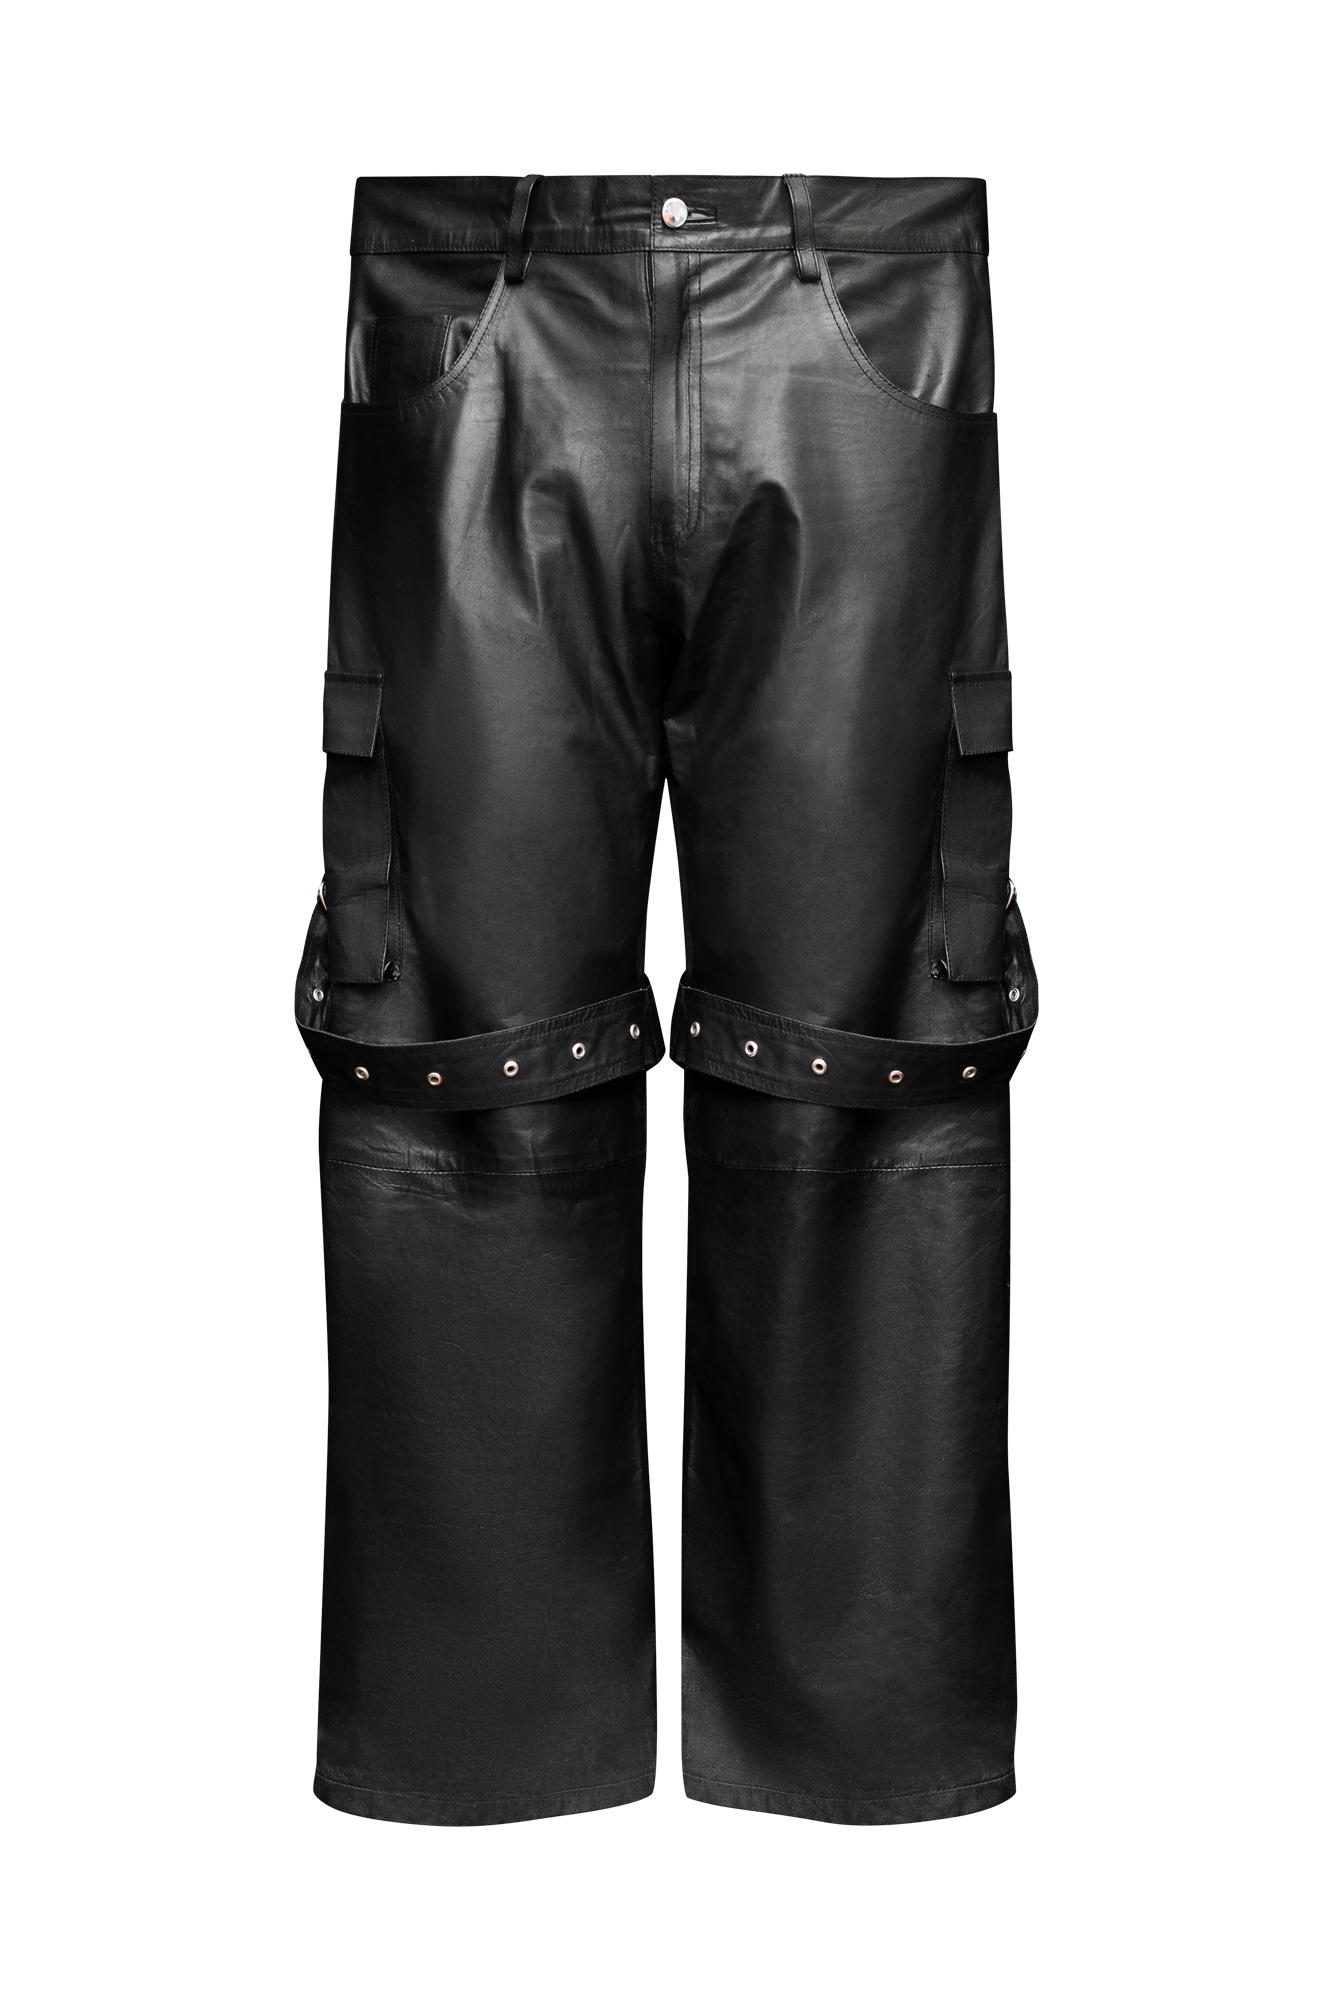 Women's Irin Cargo Pants In Vintage-effect Nappa Leather by Golden Goose